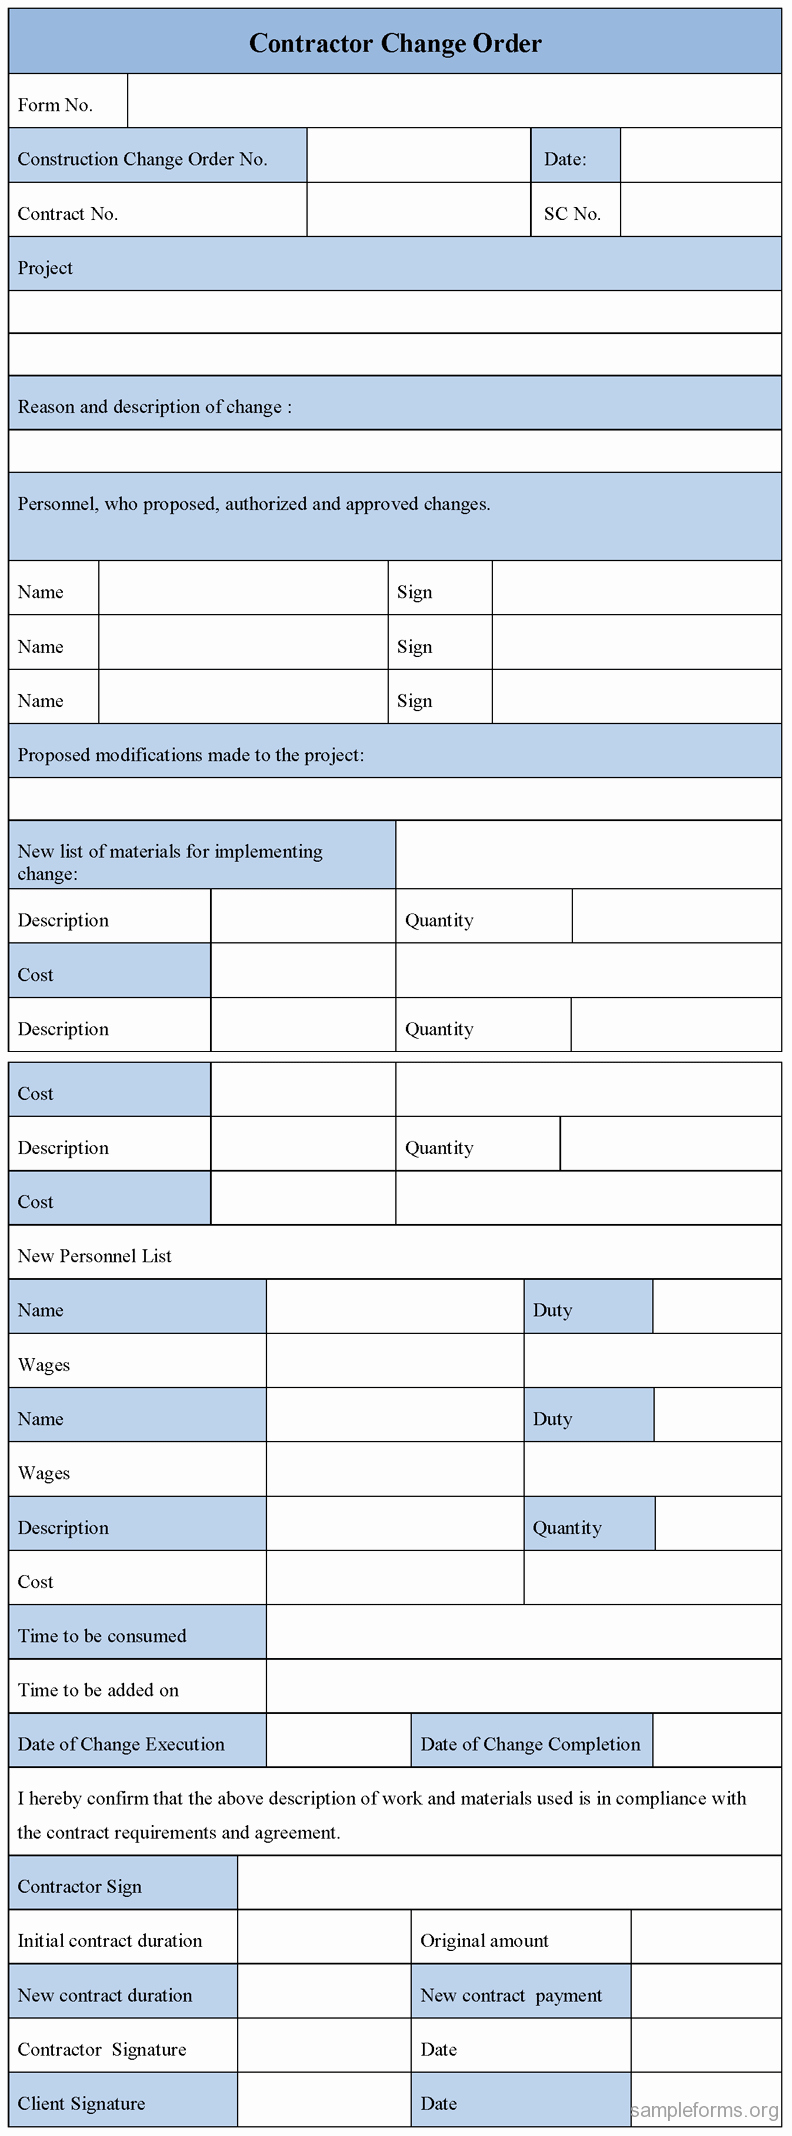 Construction Change order form Luxury Contractor Change order form Sample forms